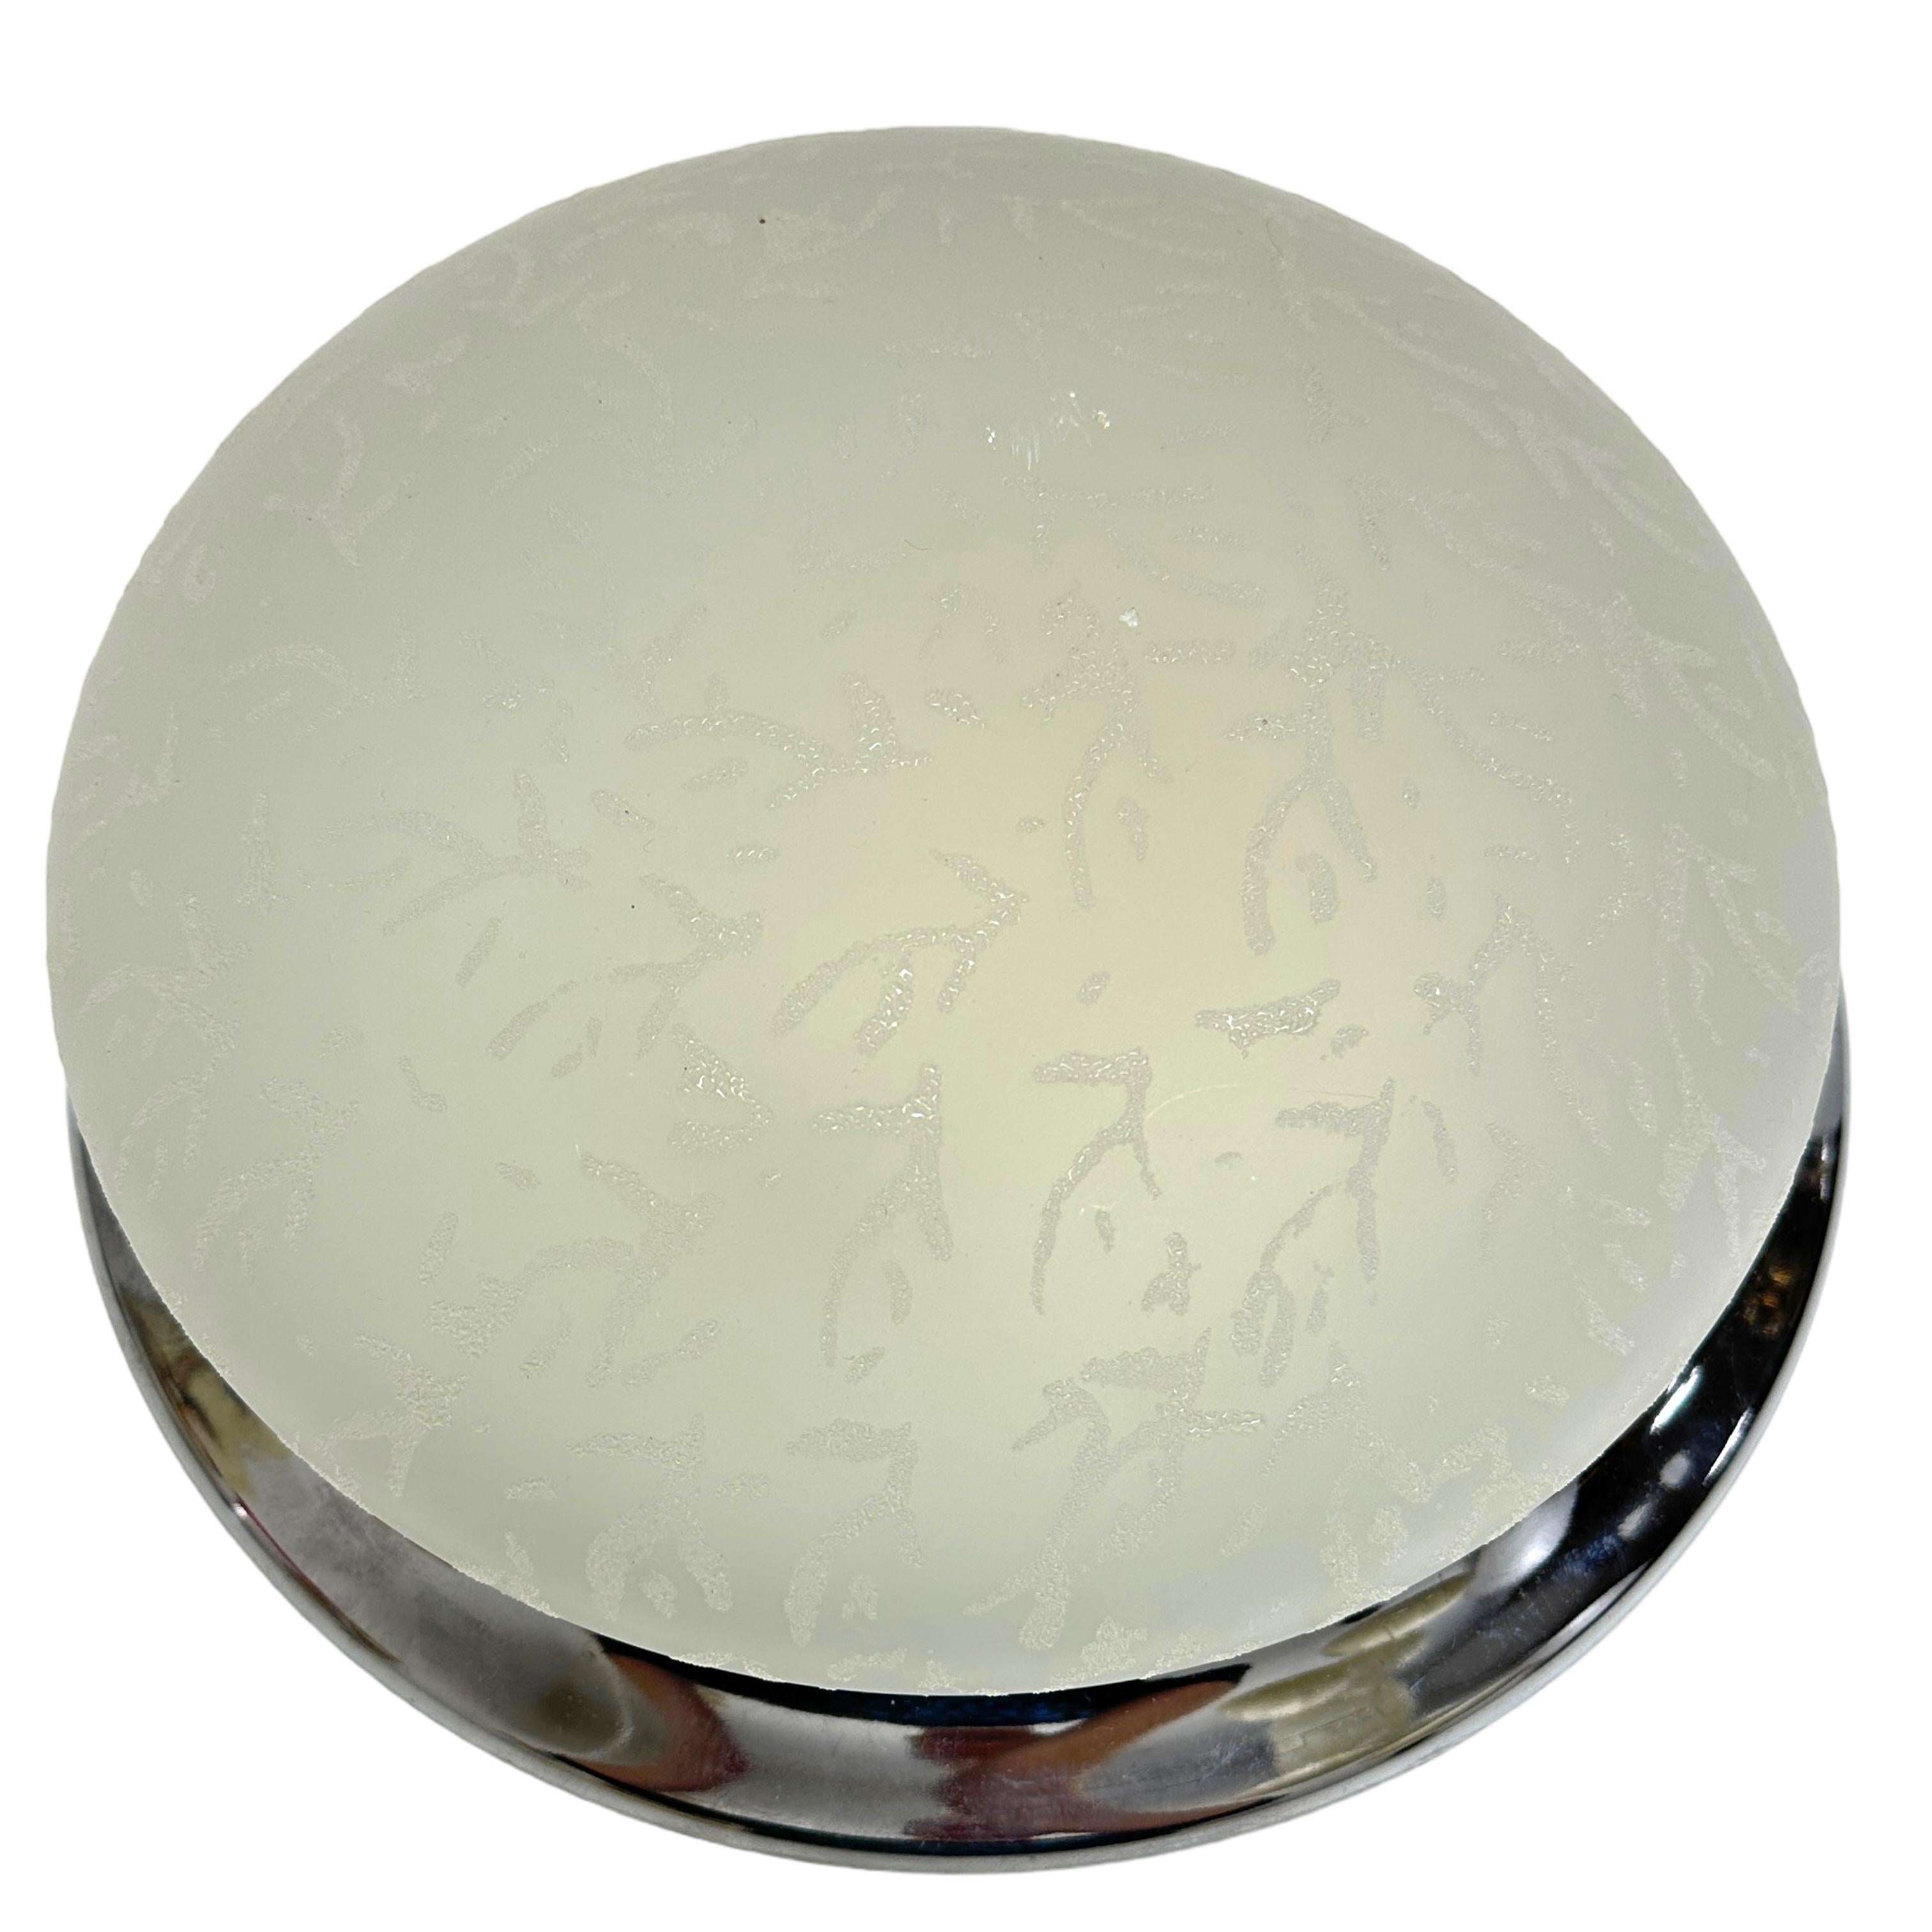 A beautiful flush mount, marked made in Italy. Made in the 1980s. The fixture requires one European E27 Edison bulb, up to 60 watts. The glass is a satin glass with a nice motif. Great for any room or for your vanity or dressing room.